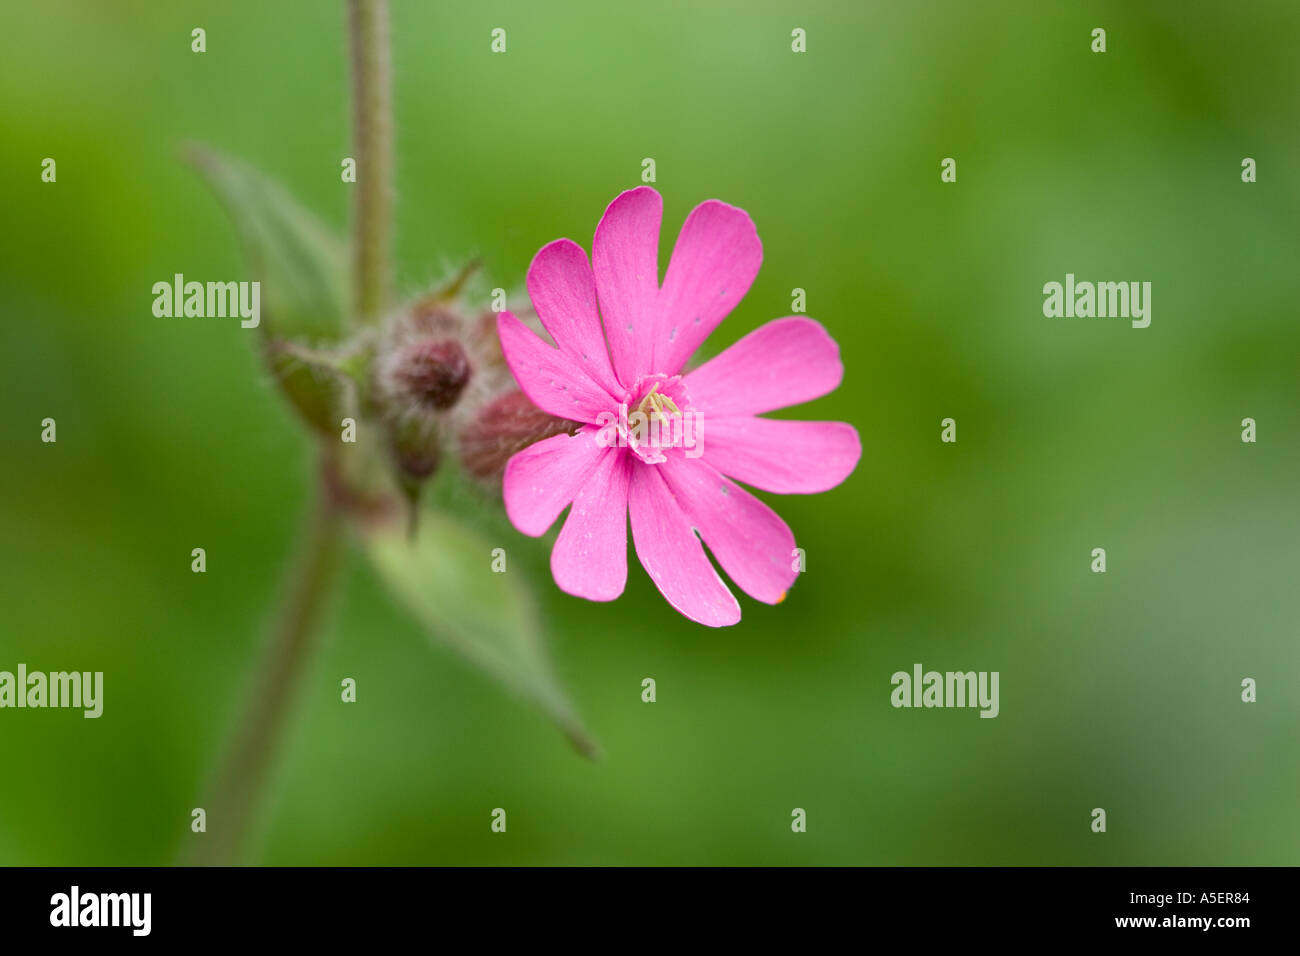 Red Campion wildflower with green soft focus blurred background in morecambe lancashire uk Stock Photo